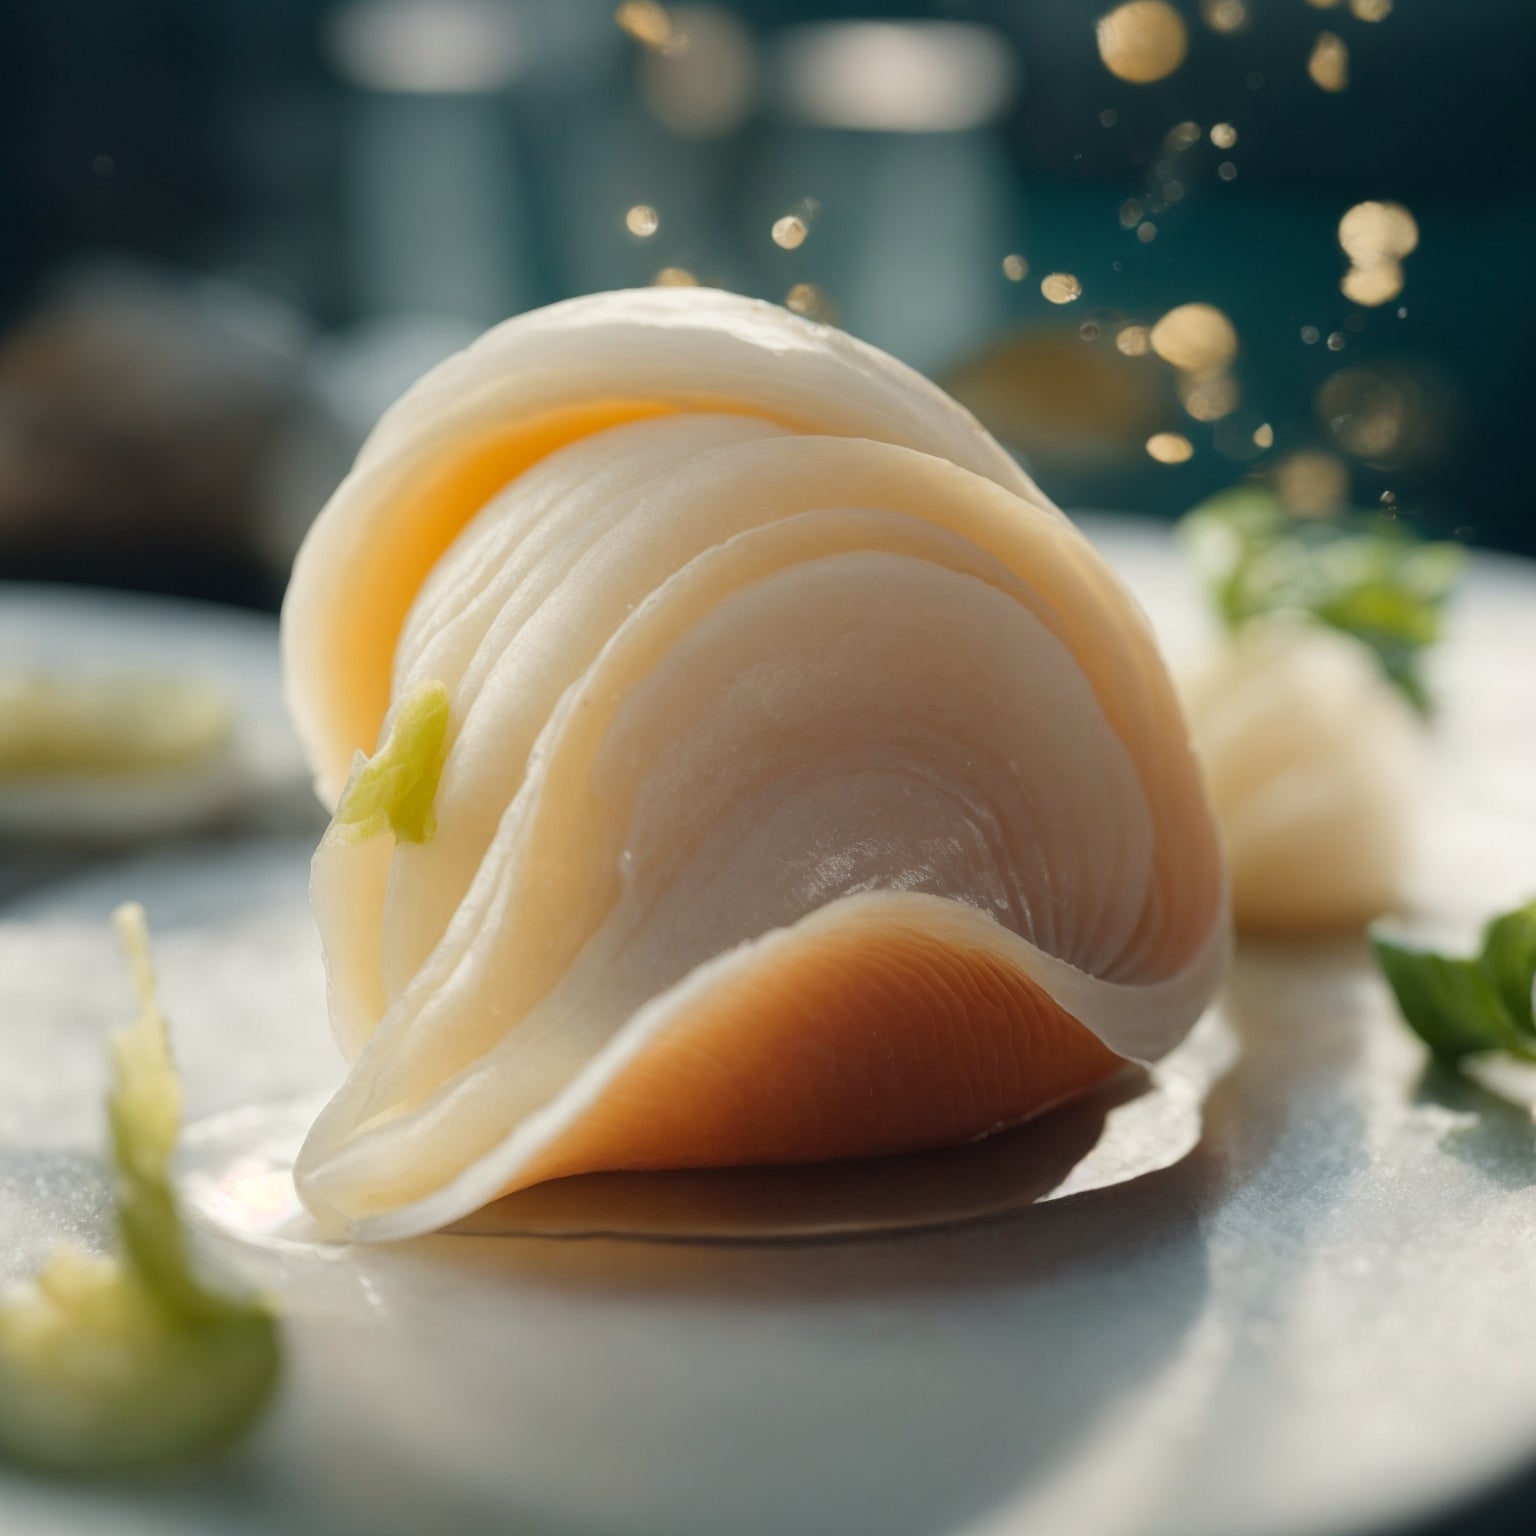 Geoduck: A Taste of Excellence